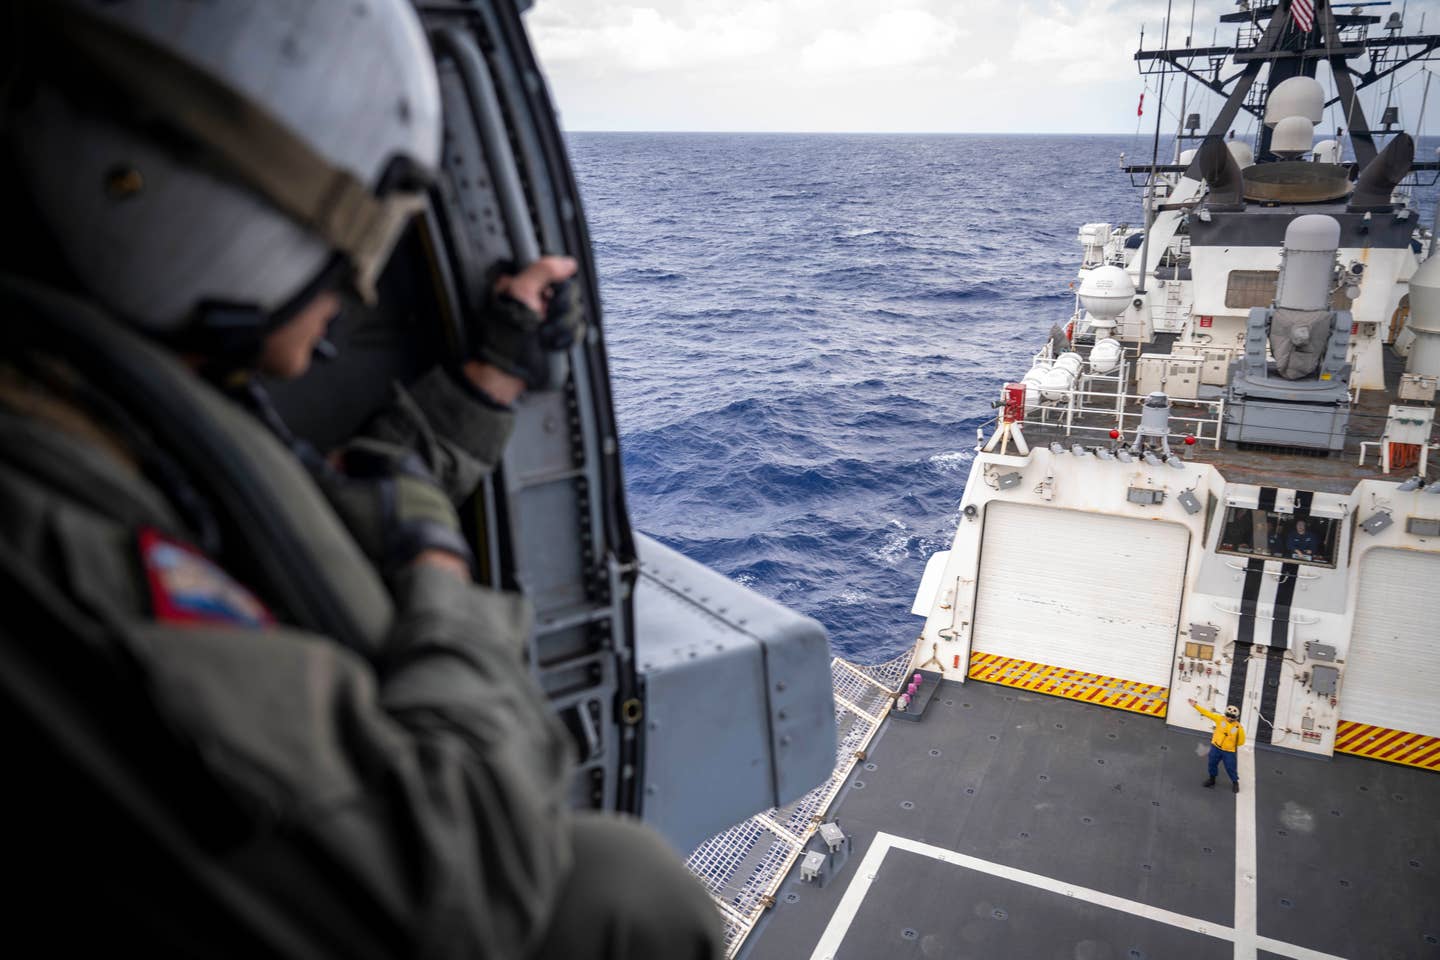 PACIFIC OCEAN (July 30, 2022) U.S. Navy Petty Officer 1st Class Humberto Alba, a naval aircrewman tactical-helicopter, attached to Helicopter Maritime Strike Squadron (HSM) 37, deployed on U.S. Coast Guard Legend-class cutter USCGC Midgett (WMSL 757), looks down at a USCGC crewmember after taking off during flight operations during Rim of the Pacific (RIMPAC) 2022. (U.S. Coast Guard photo by Petty Officer 3rd Class Taylor Bacon)